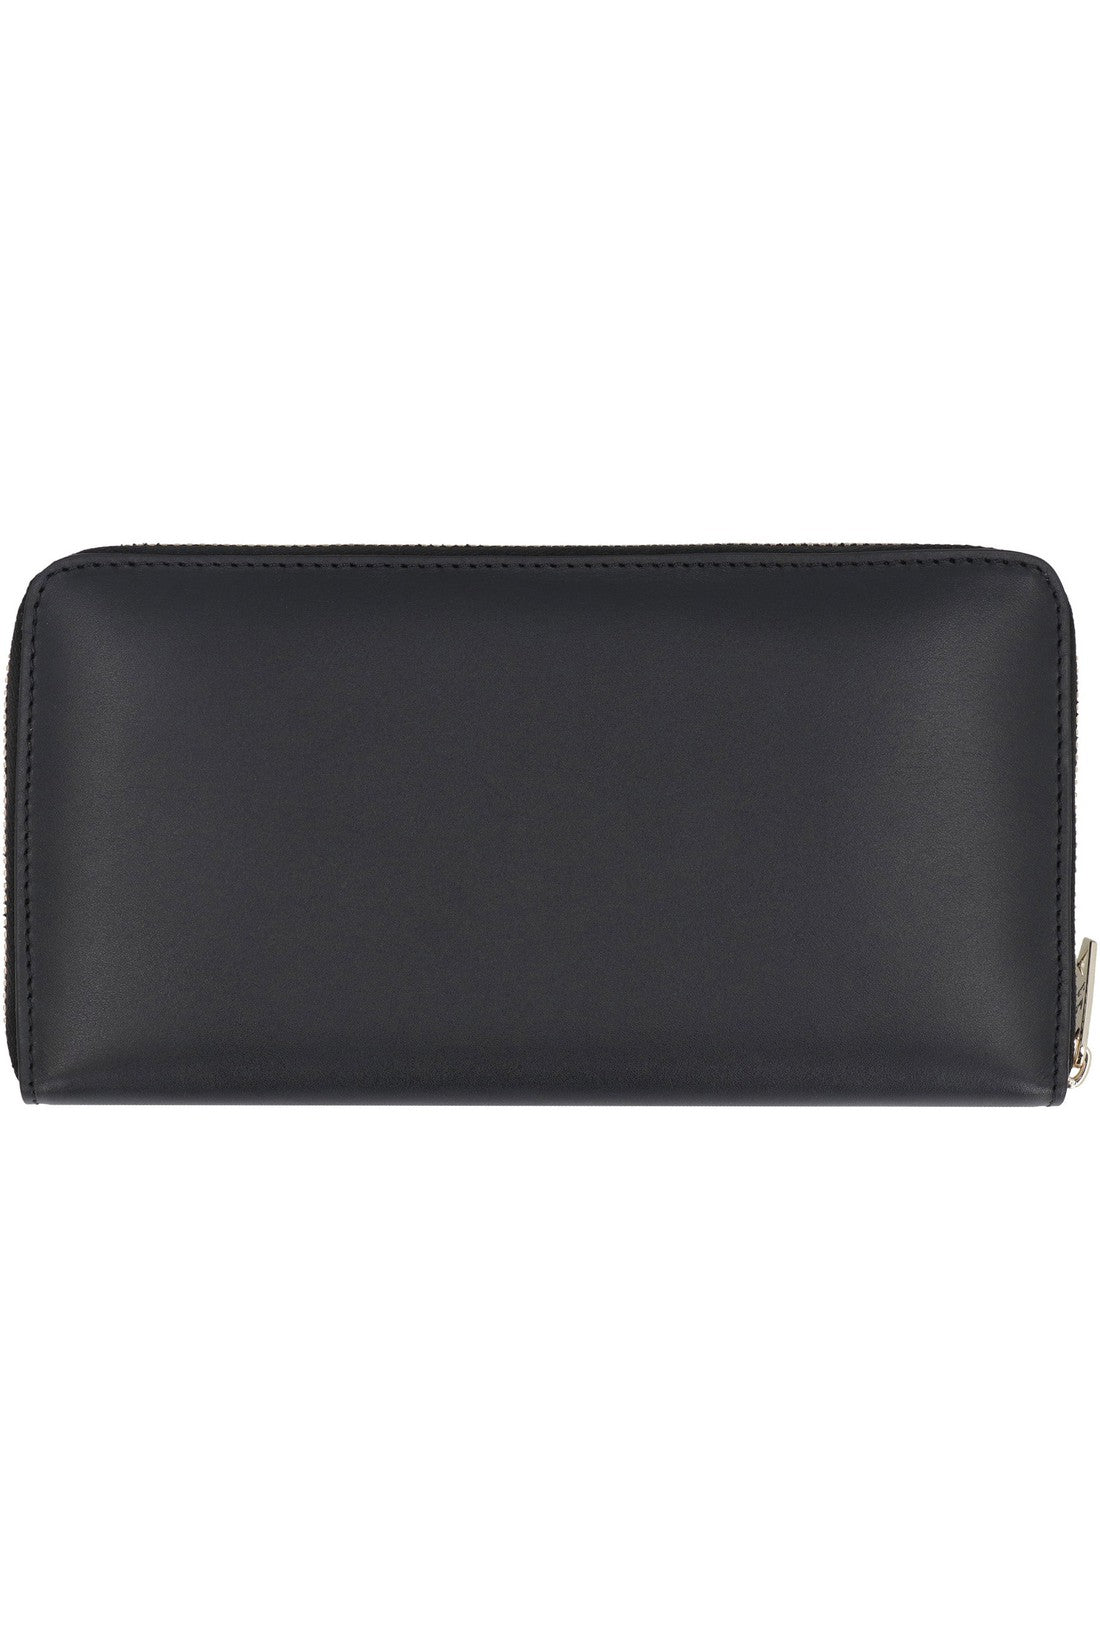 Paul Smith-OUTLET-SALE-Leather zip around wallet-ARCHIVIST